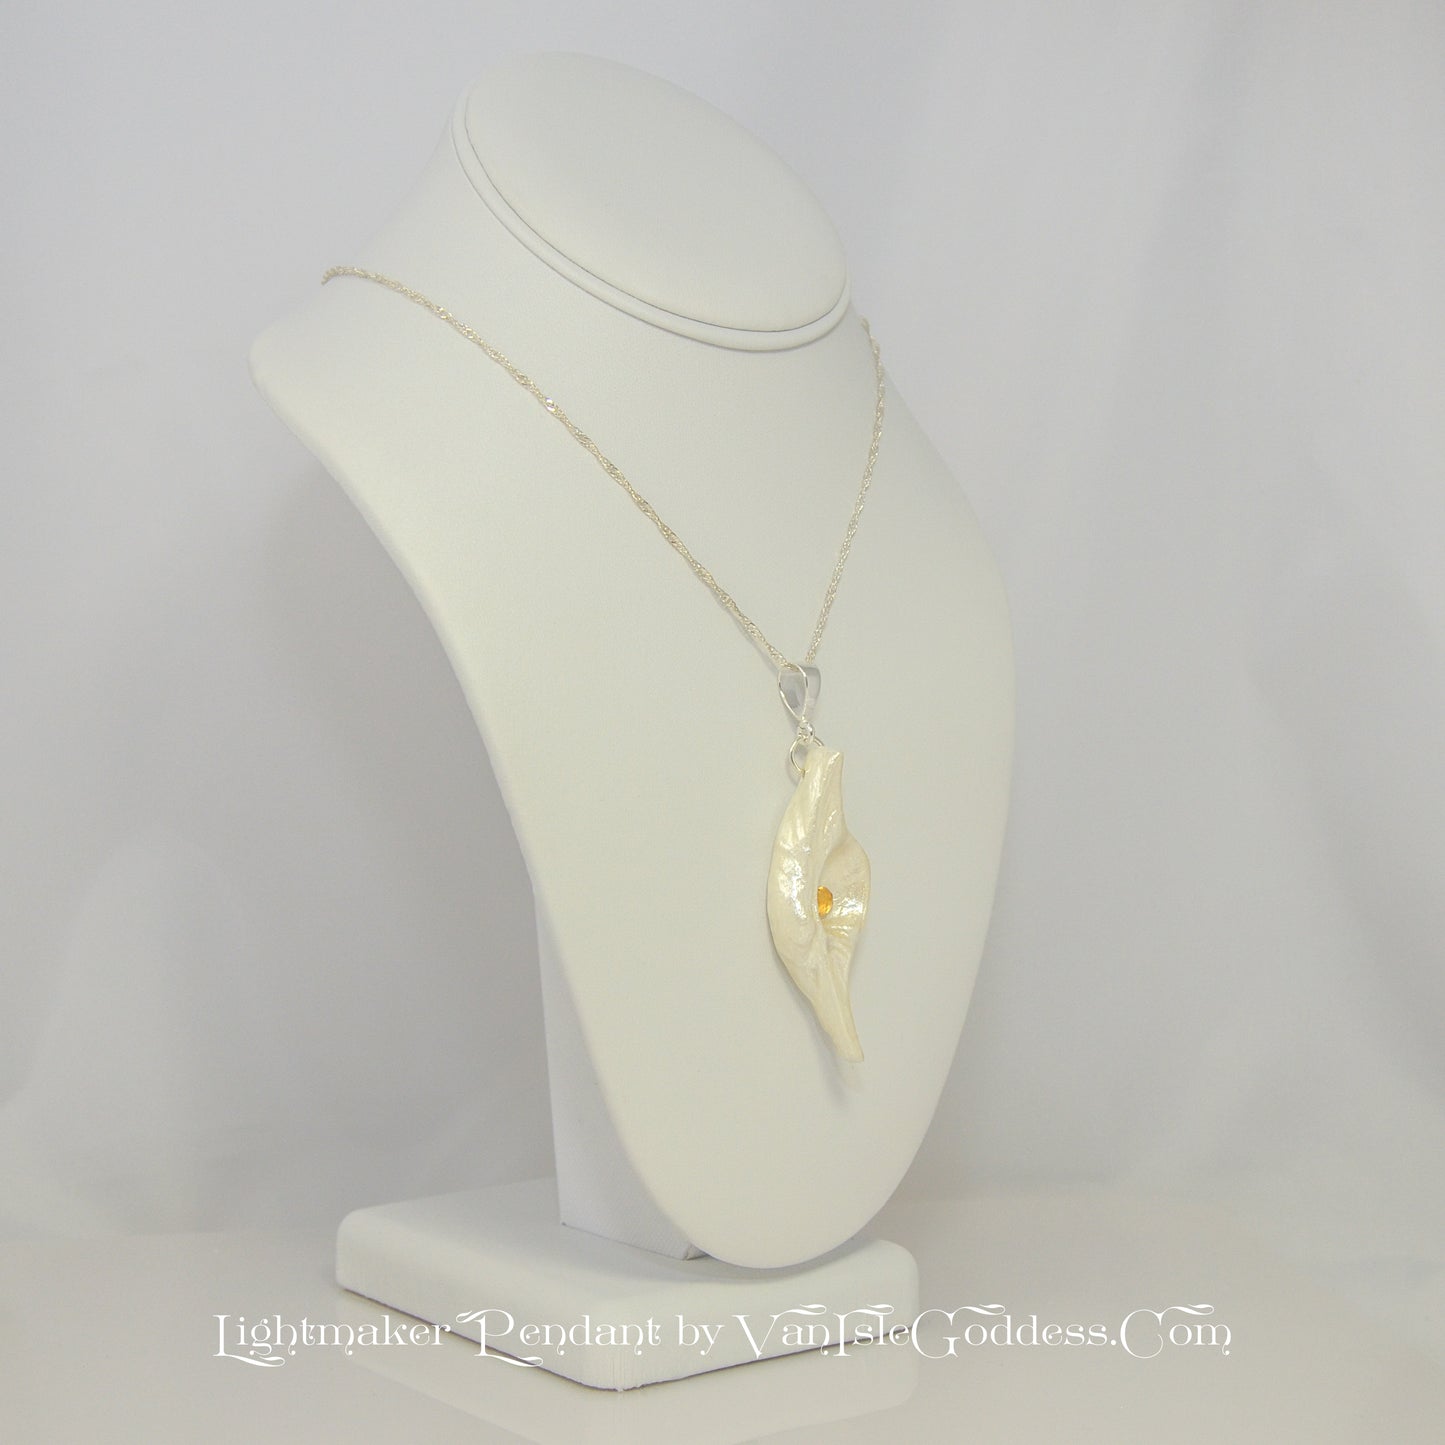 Lightmaker natural seashell pendant A beautiful pear shaped rose cut Citrine compliments the pendant. The pendant is turned to show the right side of the pendant.